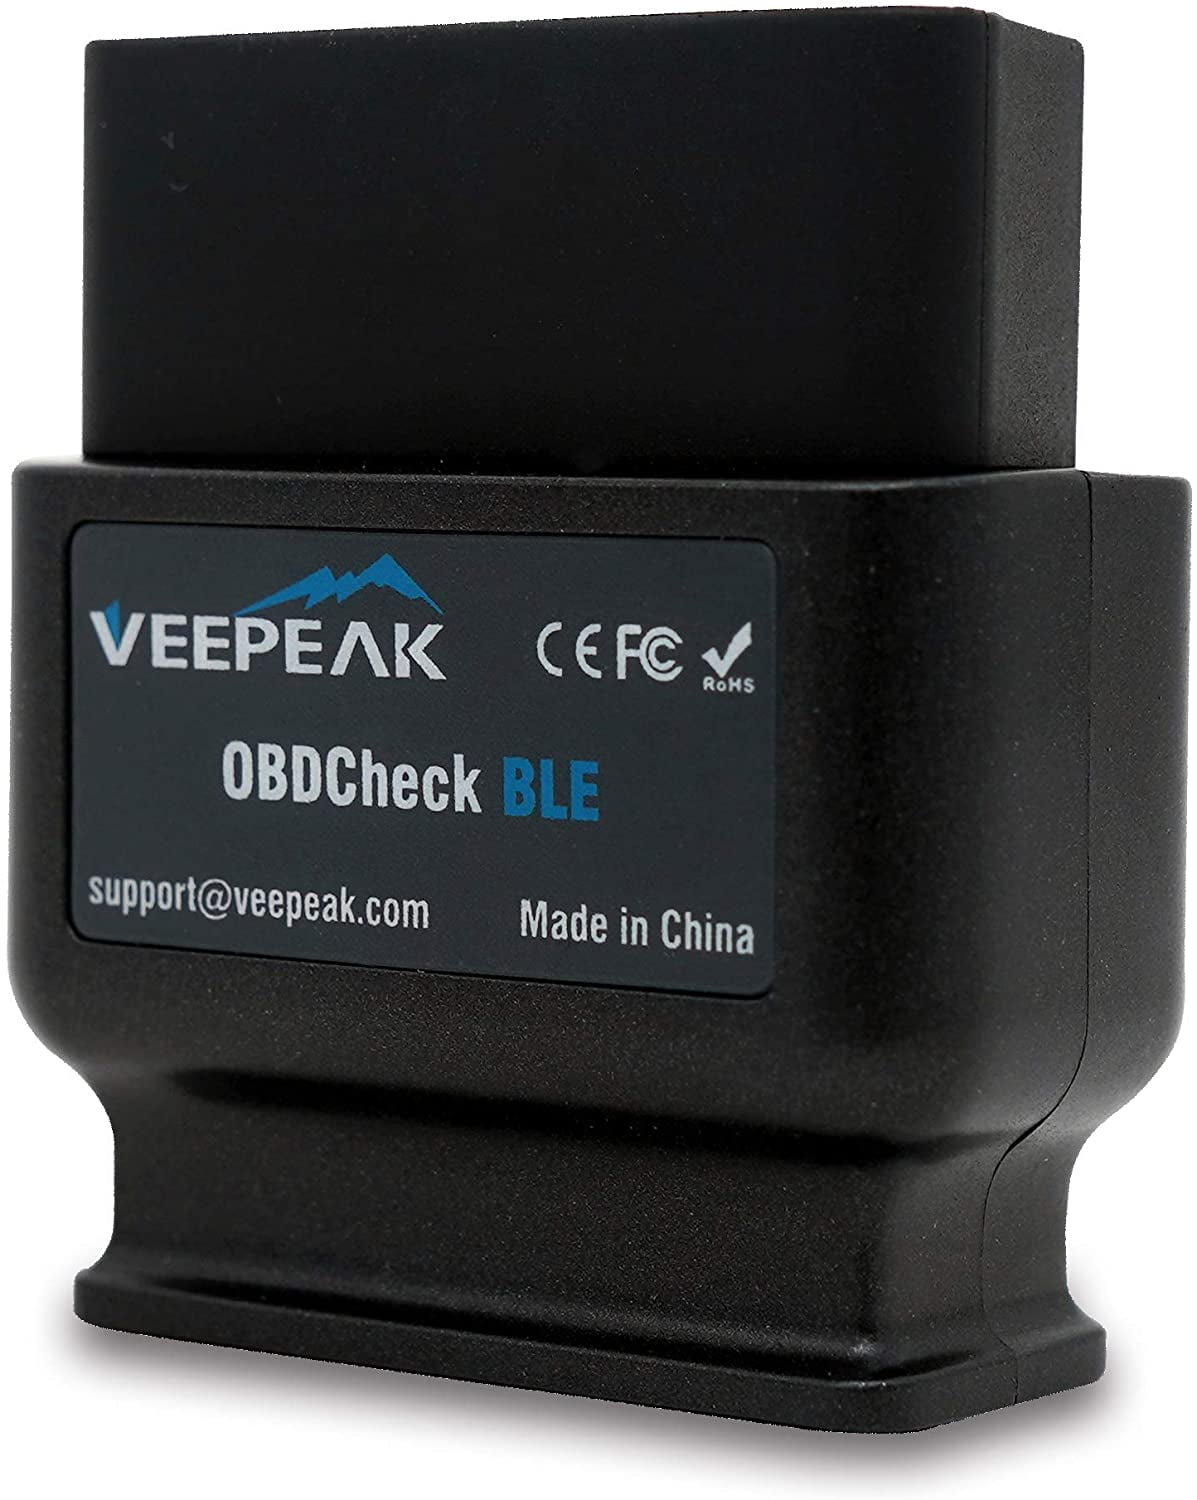 Veepeak OBDCheck BLE OBD2 Bluetooth Scanner Auto OBD II Diagnostic Scan Tool for iOS Android, Bluetooth 4.0 Car Check Engine Light Code Reader Supports Torque, OBD Fusion app - Walmart.com